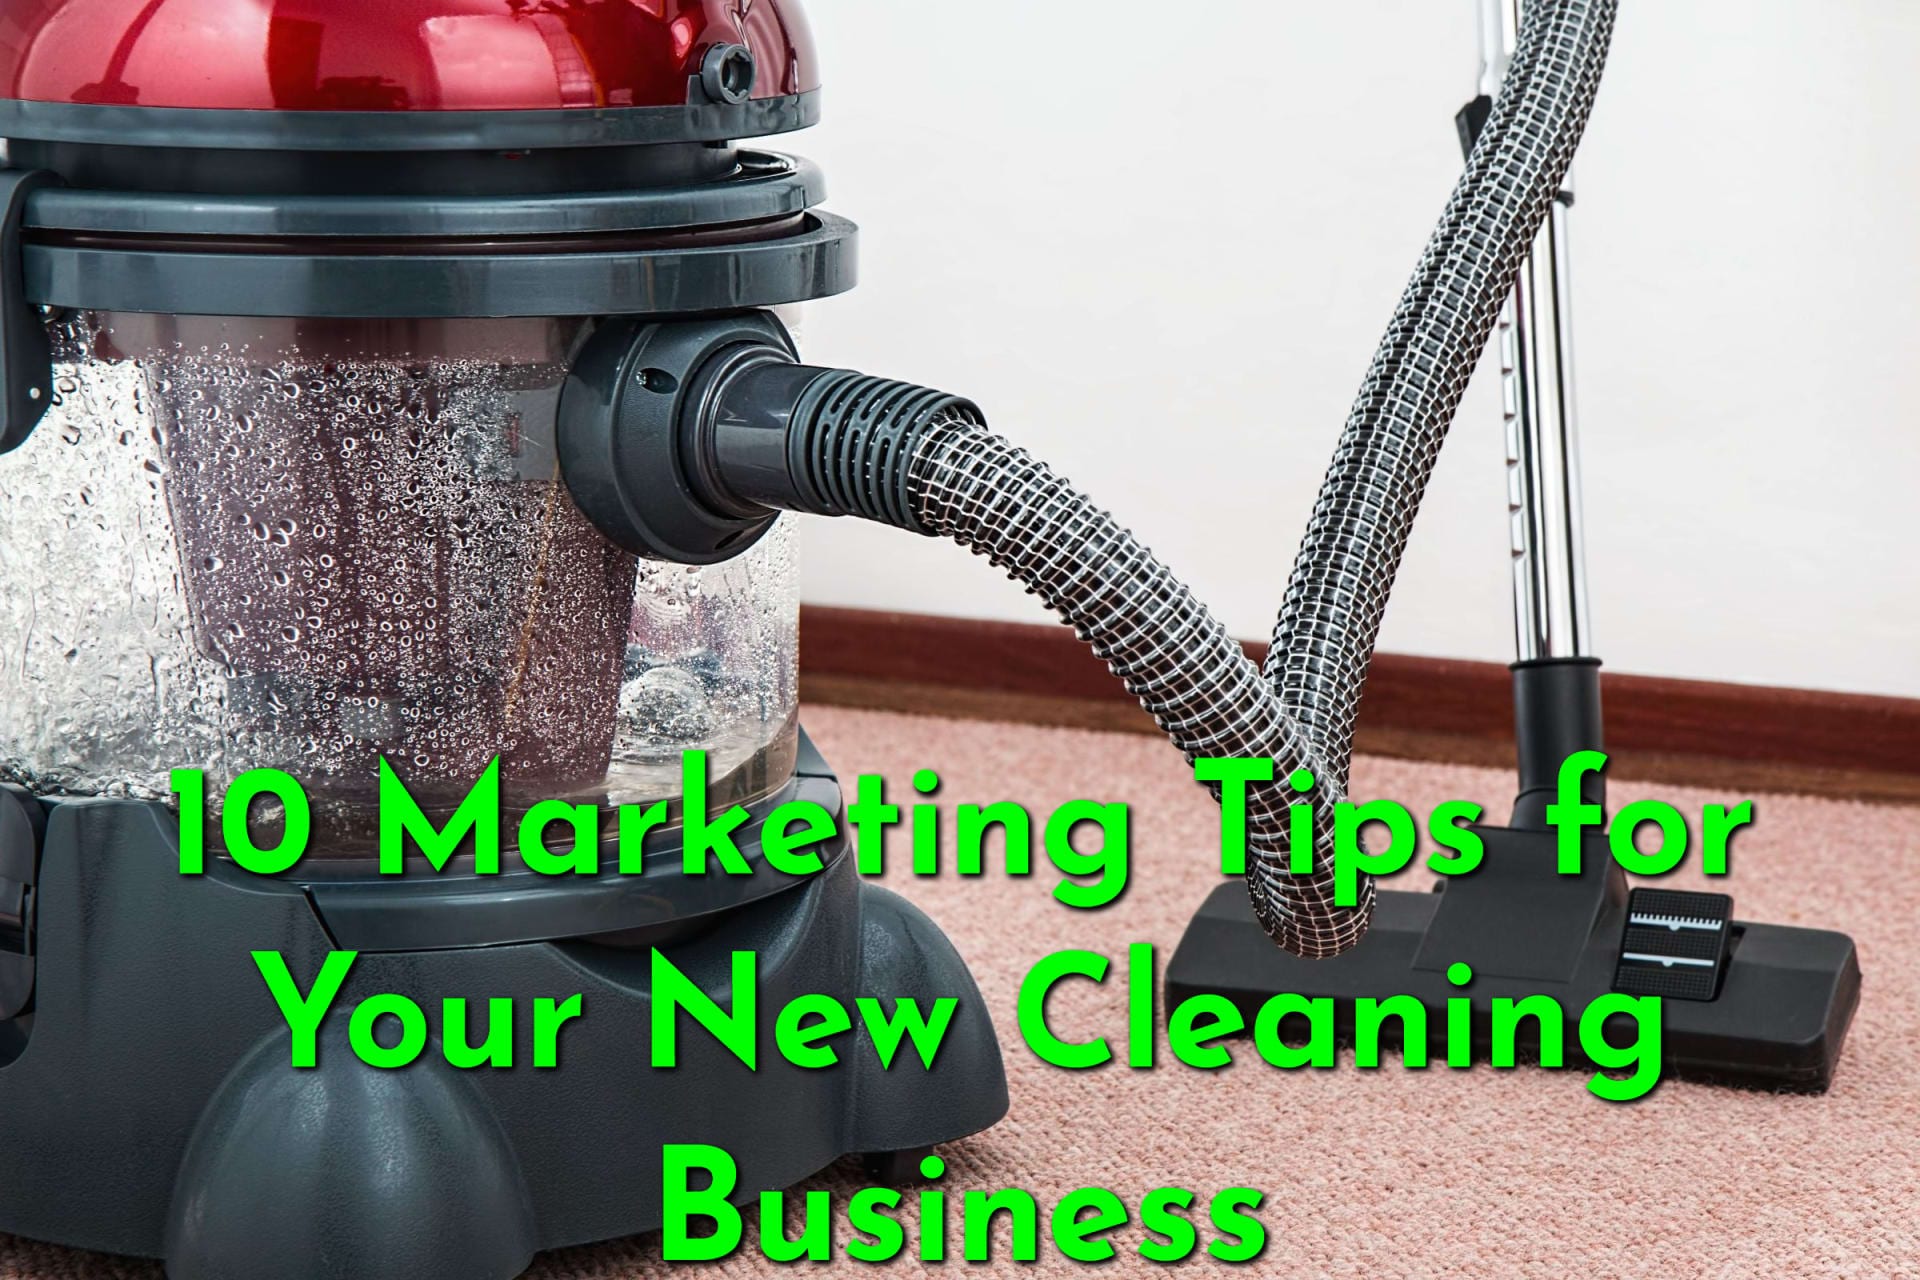 10 Marketing Tips for Your New Cleaning Business